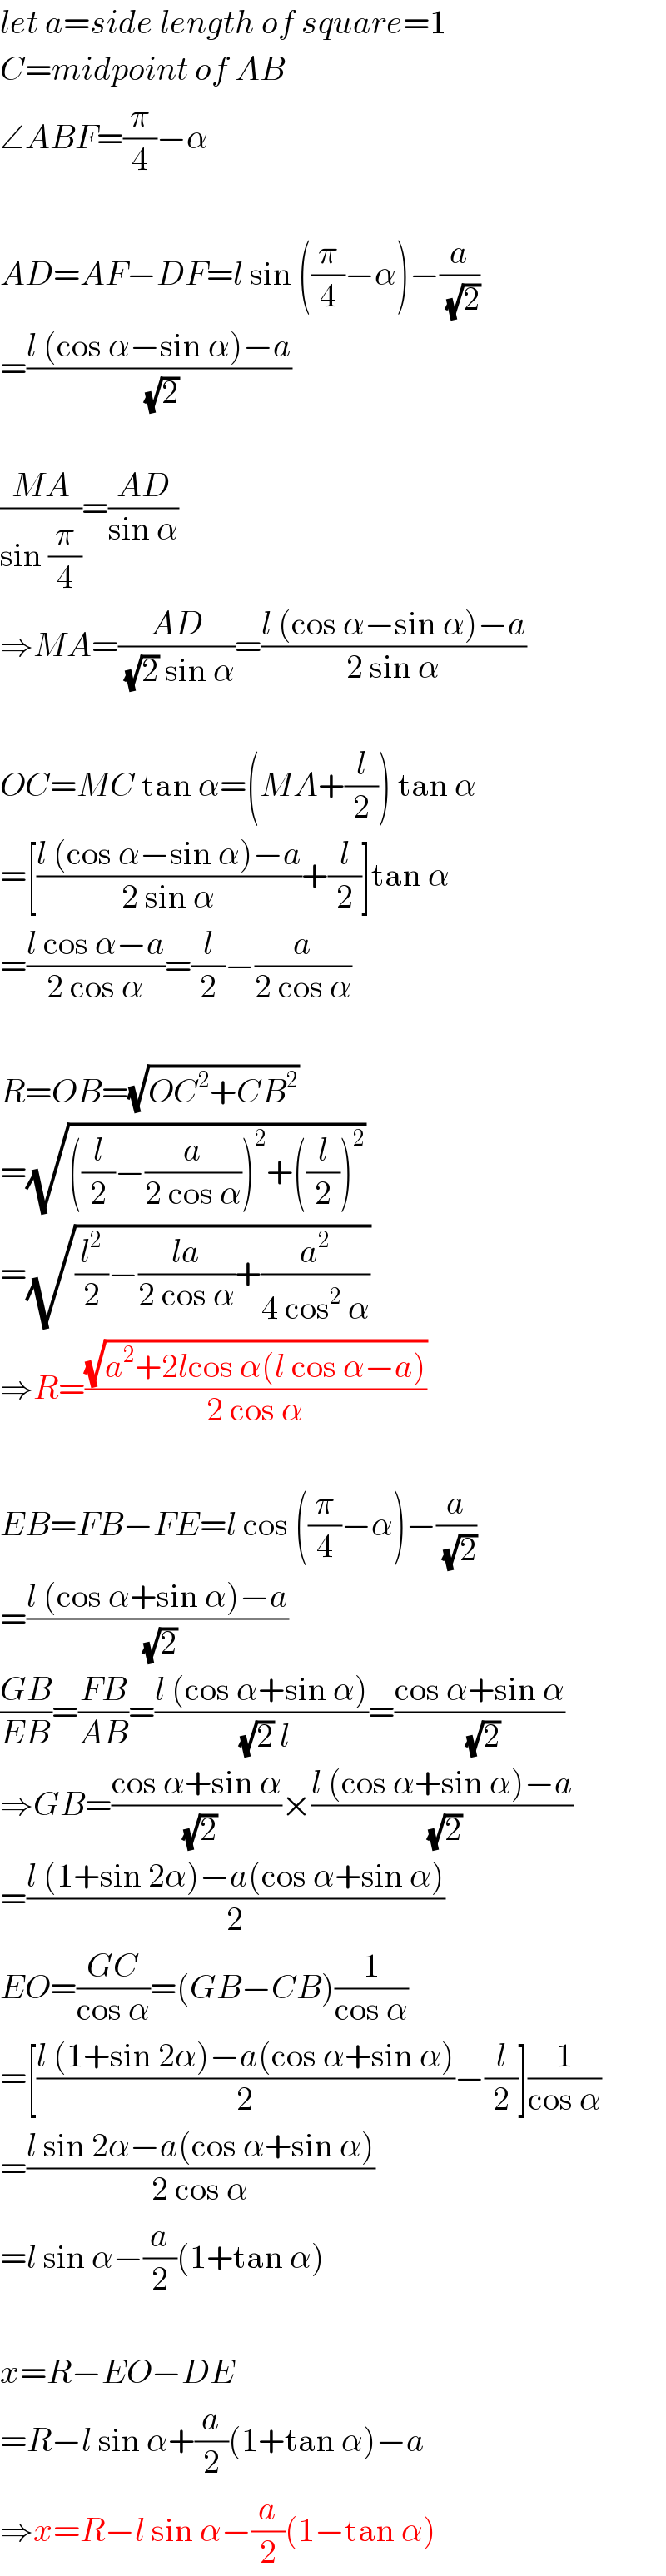 let a=side length of square=1  C=midpoint of AB  ∠ABF=(π/4)−α    AD=AF−DF=l sin ((π/4)−α)−(a/(√2))  =((l (cos α−sin α)−a)/(√2))    ((MA)/(sin (π/4)))=((AD)/(sin α))  ⇒MA=((AD)/((√2) sin α))=((l (cos α−sin α)−a)/(2 sin α))    OC=MC tan α=(MA+(l/2)) tan α  =[((l (cos α−sin α)−a)/(2 sin α))+(l/2)]tan α  =((l cos α−a)/(2 cos α))=(l/2)−(a/(2 cos α))    R=OB=(√(OC^2 +CB^2 ))  =(√(((l/2)−(a/(2 cos α)))^2 +((l/2))^2 ))  =(√((l^2 /2)−((la)/(2 cos α))+(a^2 /(4 cos^2  α))))  ⇒R=((√(a^2 +2lcos α(l cos α−a)))/(2 cos α))    EB=FB−FE=l cos ((π/4)−α)−(a/(√2))  =((l (cos α+sin α)−a)/(√2))  ((GB)/(EB))=((FB)/(AB))=((l (cos α+sin α))/((√2) l))=((cos α+sin α)/(√2))  ⇒GB=((cos α+sin α)/(√2))×((l (cos α+sin α)−a)/(√2))  =((l (1+sin 2α)−a(cos α+sin α))/2)  EO=((GC)/(cos α))=(GB−CB)(1/(cos α))  =[((l (1+sin 2α)−a(cos α+sin α))/2)−(l/2)](1/(cos α))  =((l sin 2α−a(cos α+sin α))/(2 cos α))  =l sin α−(a/2)(1+tan α)    x=R−EO−DE  =R−l sin α+(a/2)(1+tan α)−a  ⇒x=R−l sin α−(a/2)(1−tan α)  